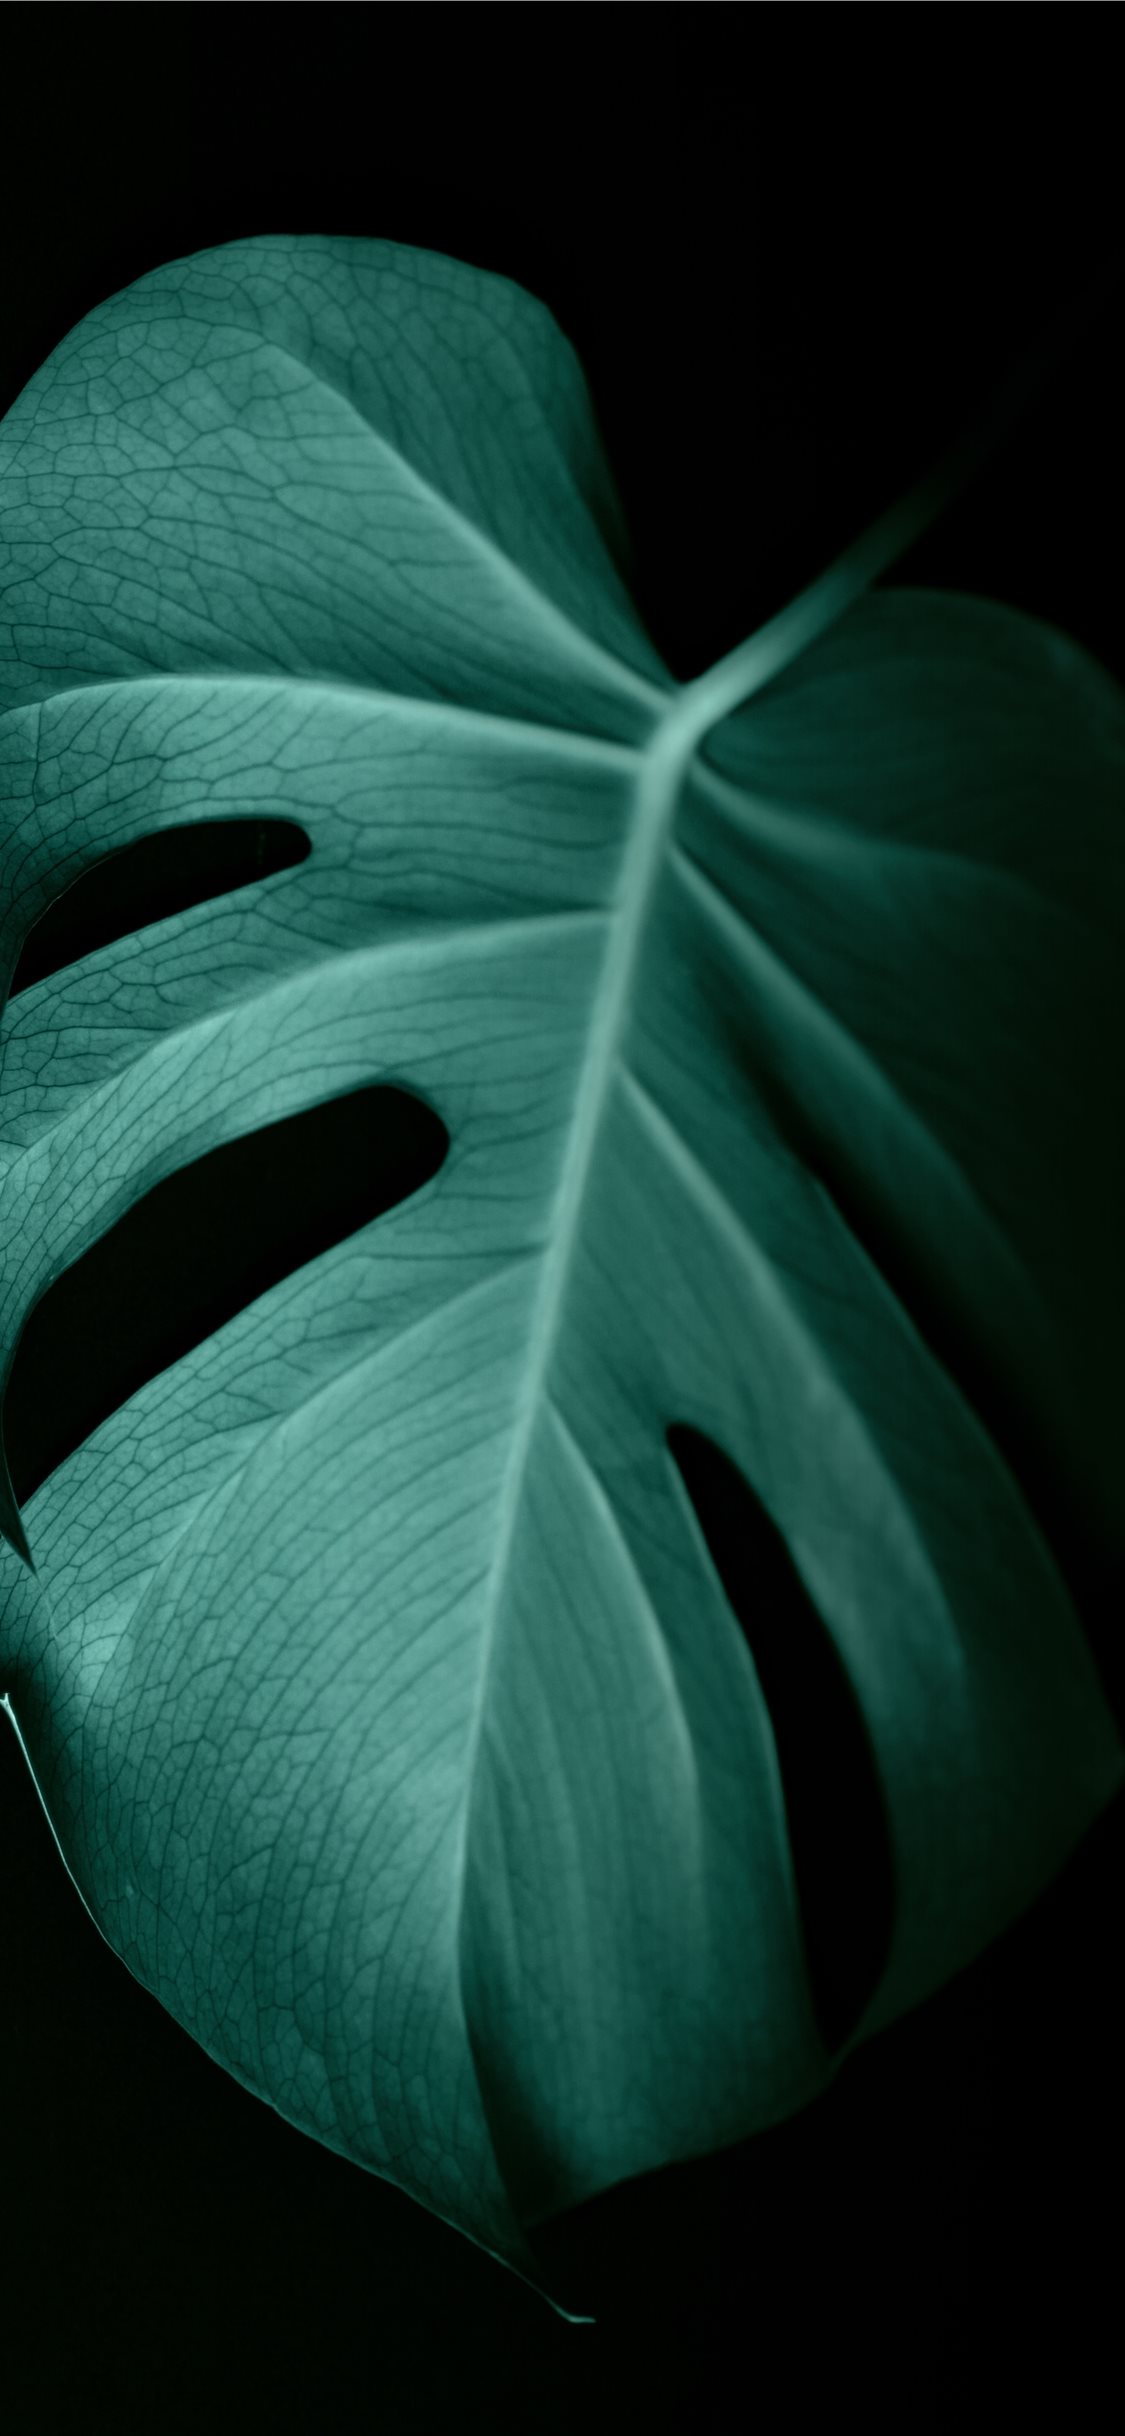 green leaf in dark surface iPhone X Wallpaper Free Download